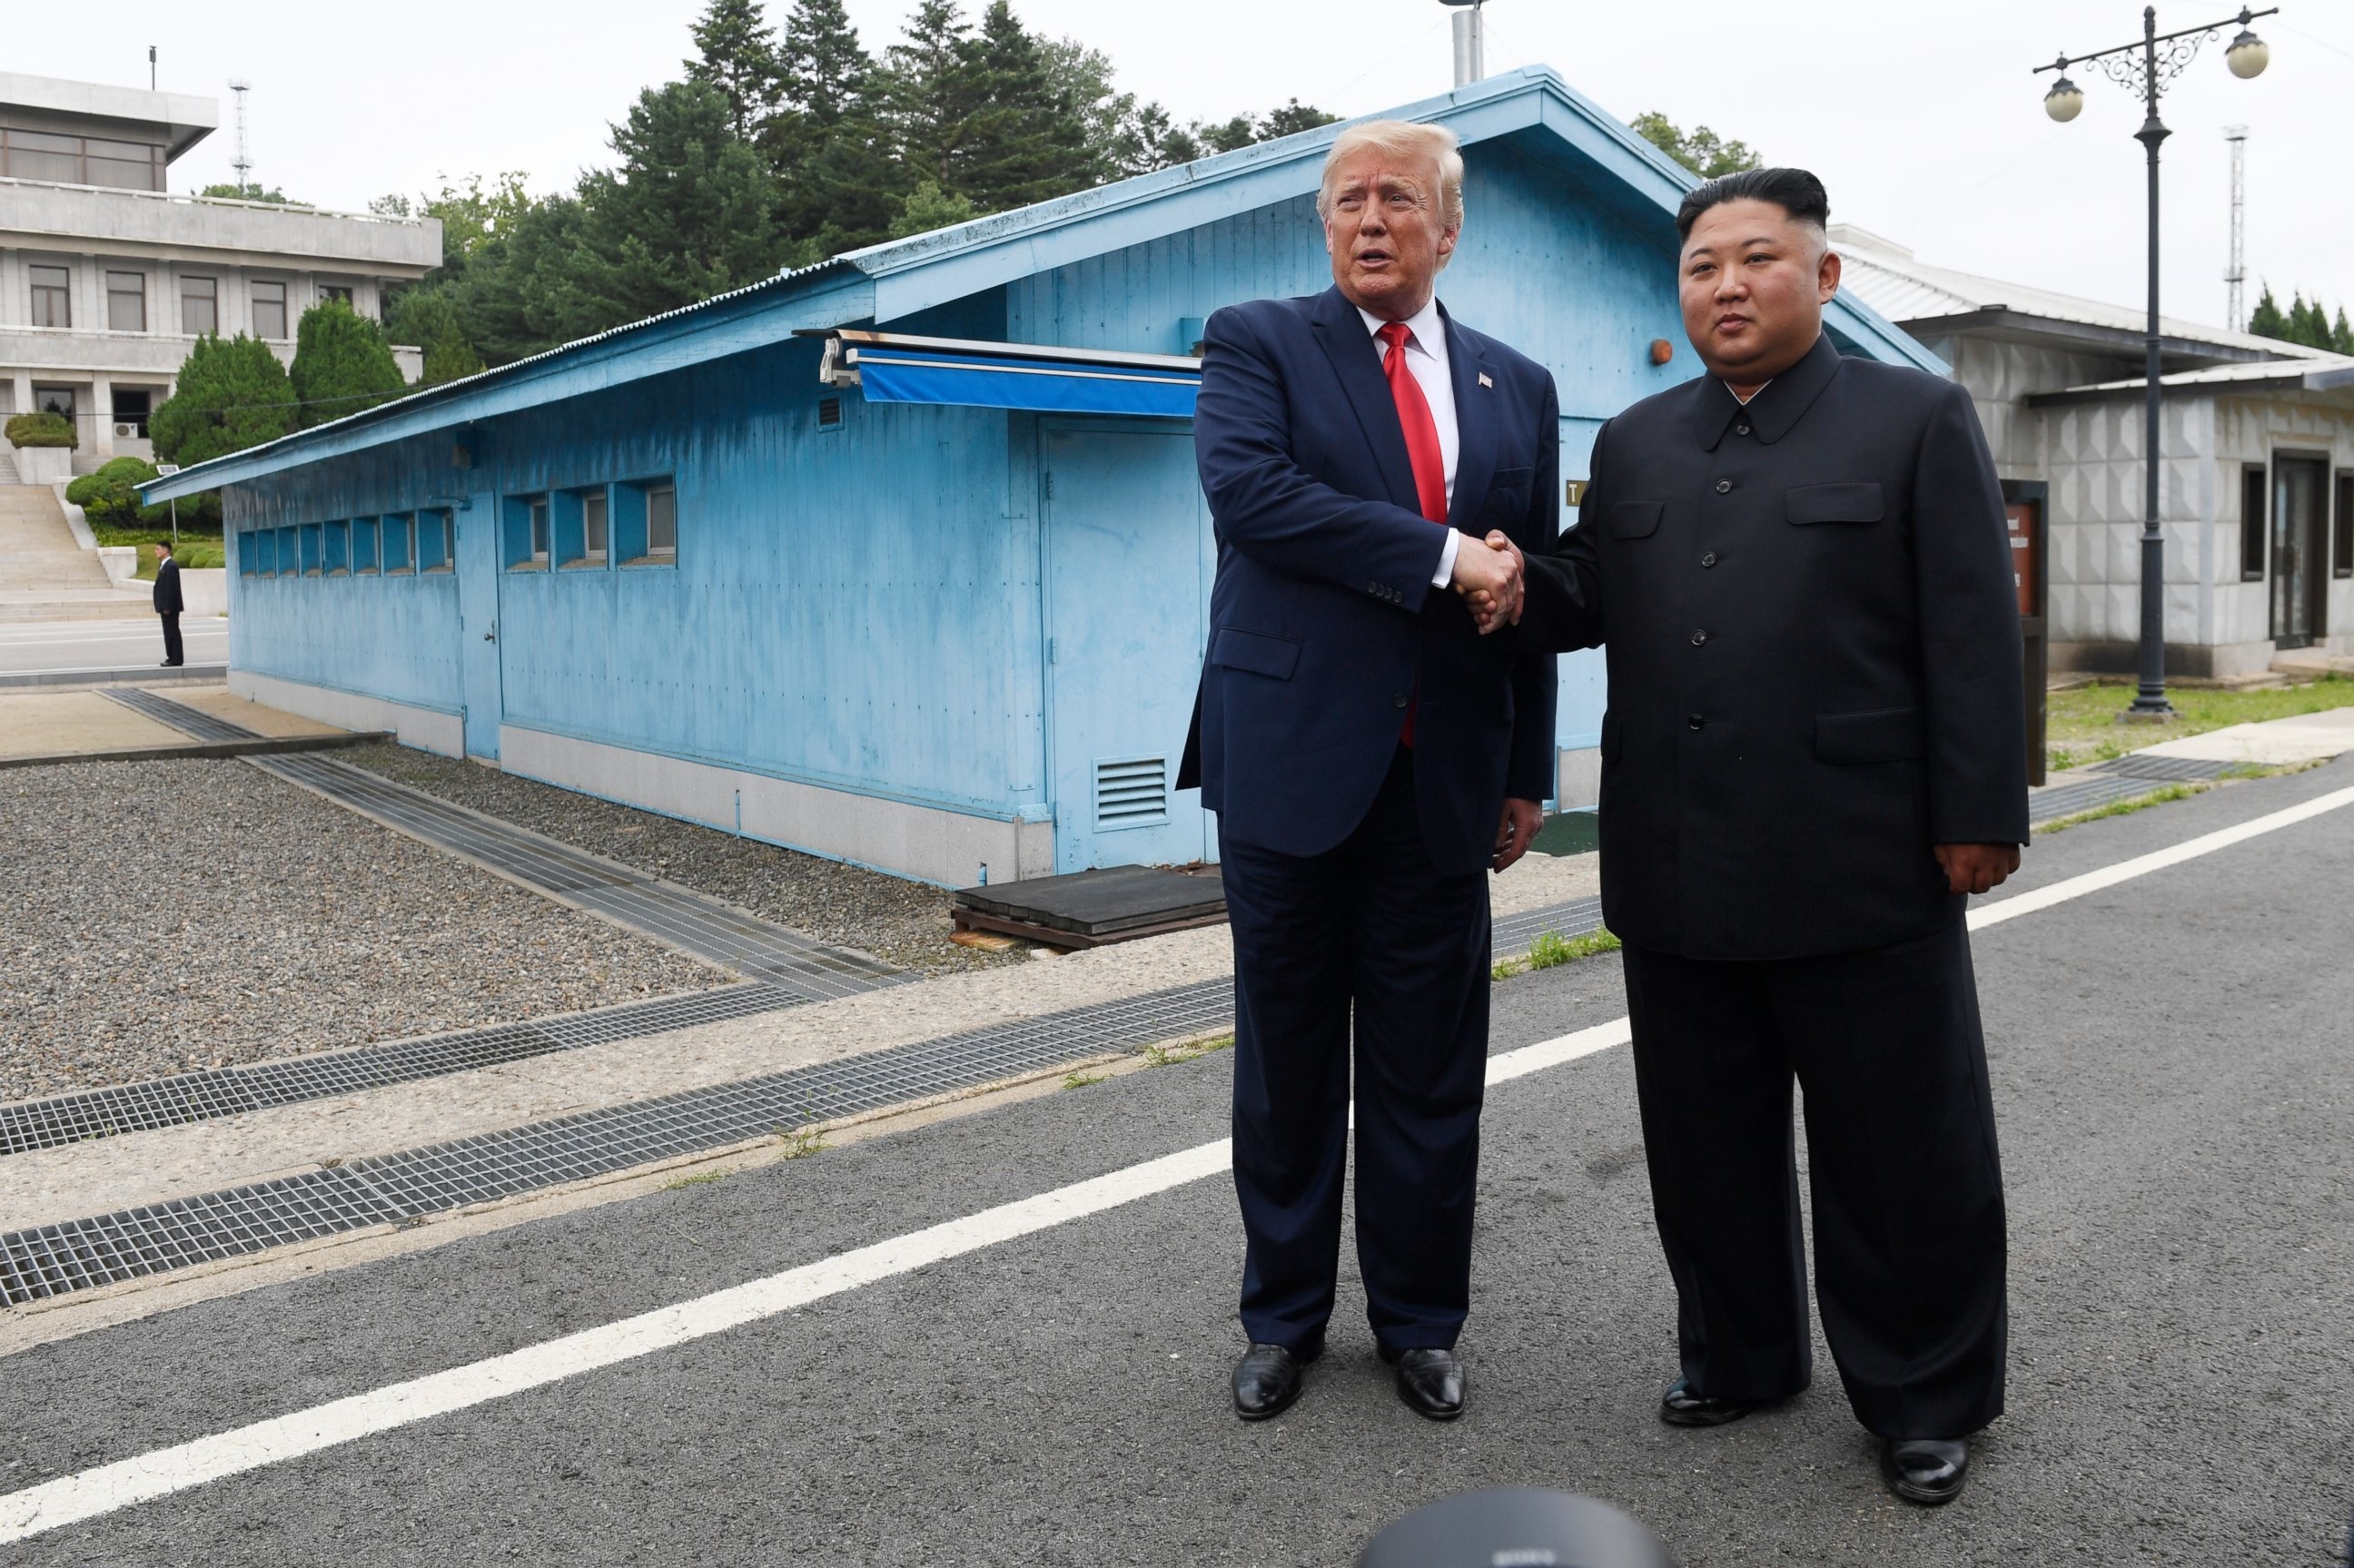 PHOTO: President Donald Trump meets with North Korean leader Kim Jong Un at the border village of Panmunjom in the Demilitarized Zone, South Korea, Sunday, June 30, 2019.